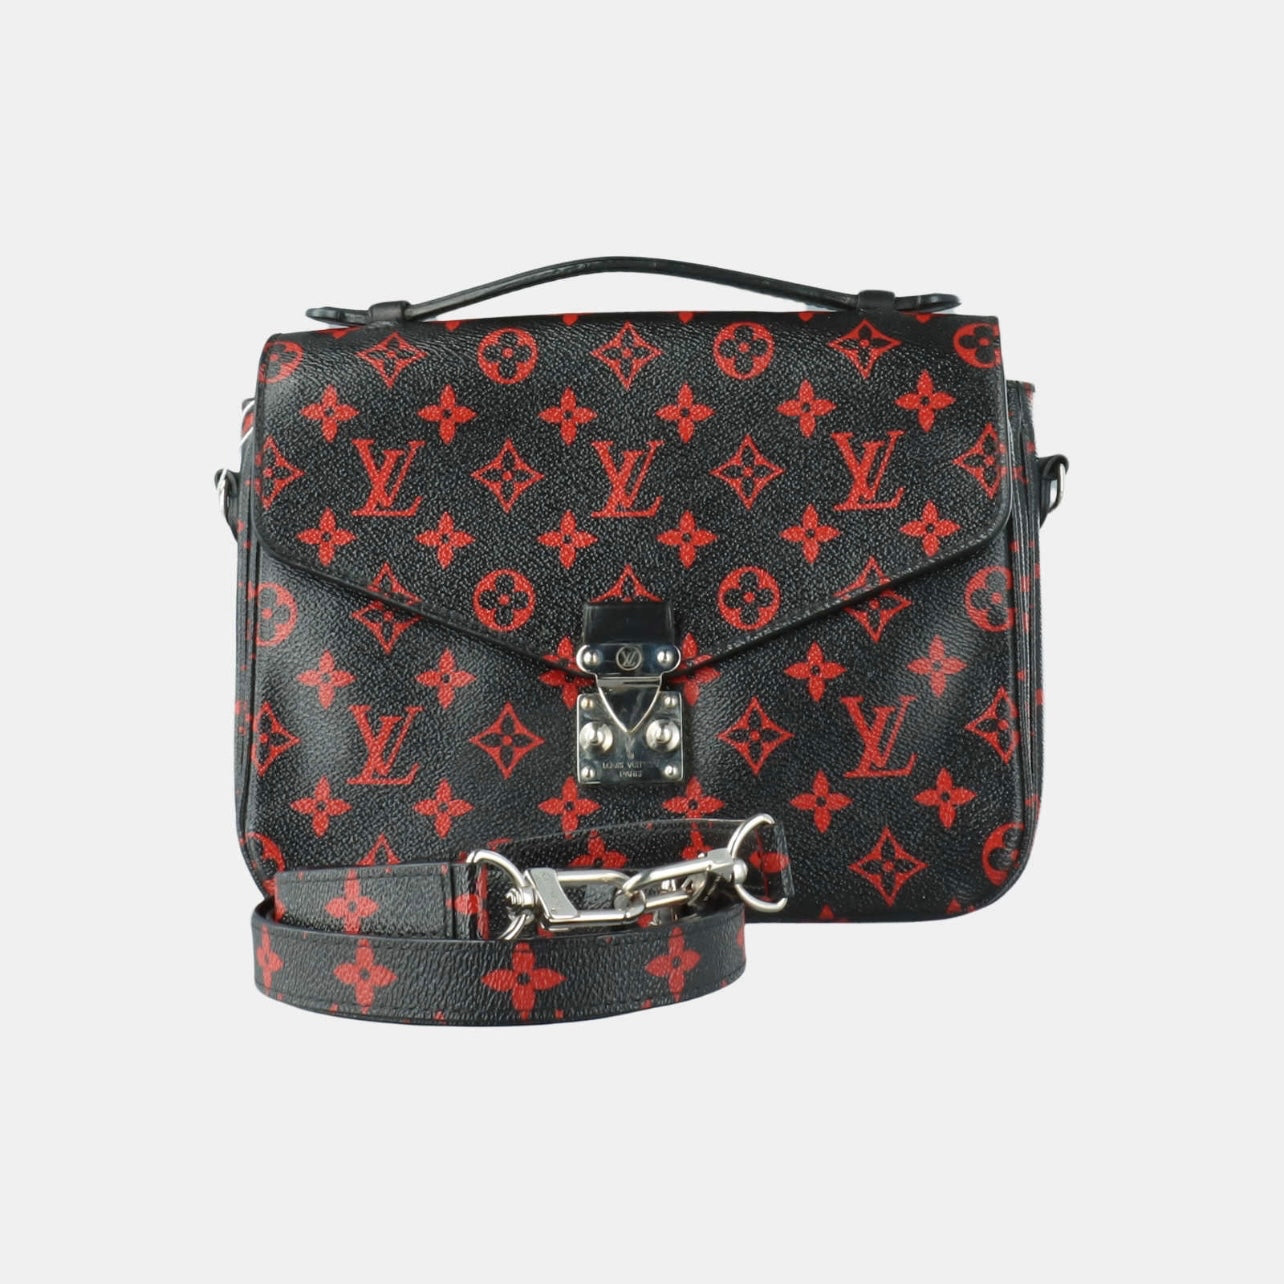 On-trend silhouette meets the iconic preloved Louis Vuitton monogram print  in this edgy Infrarouge rendition of the stylish Pochette Metis.…